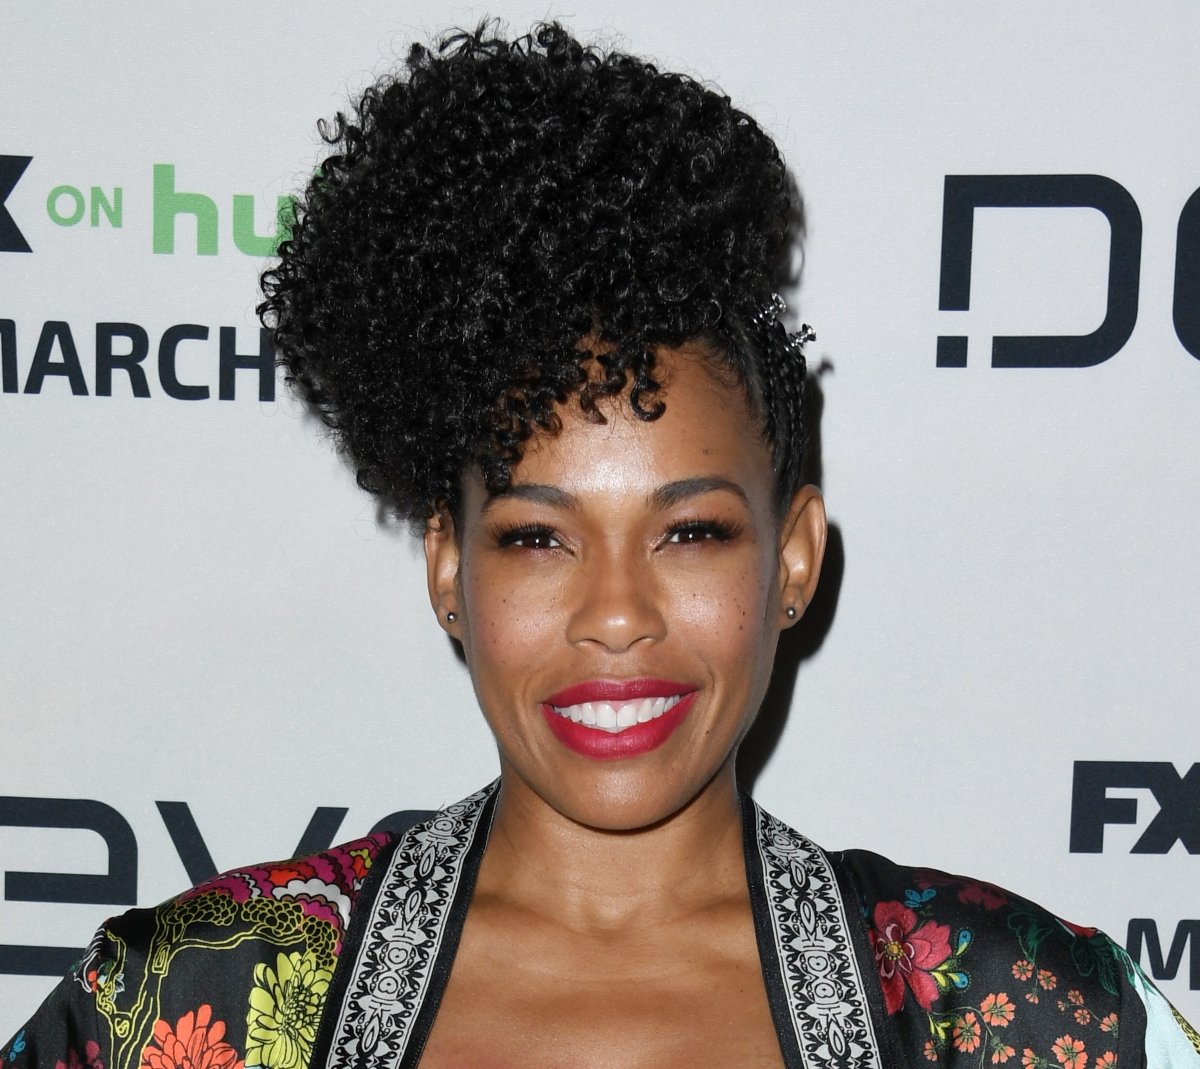 'Snowfall' star Angela Lewis attends the premiere of FX's 'Devs' in March 2020